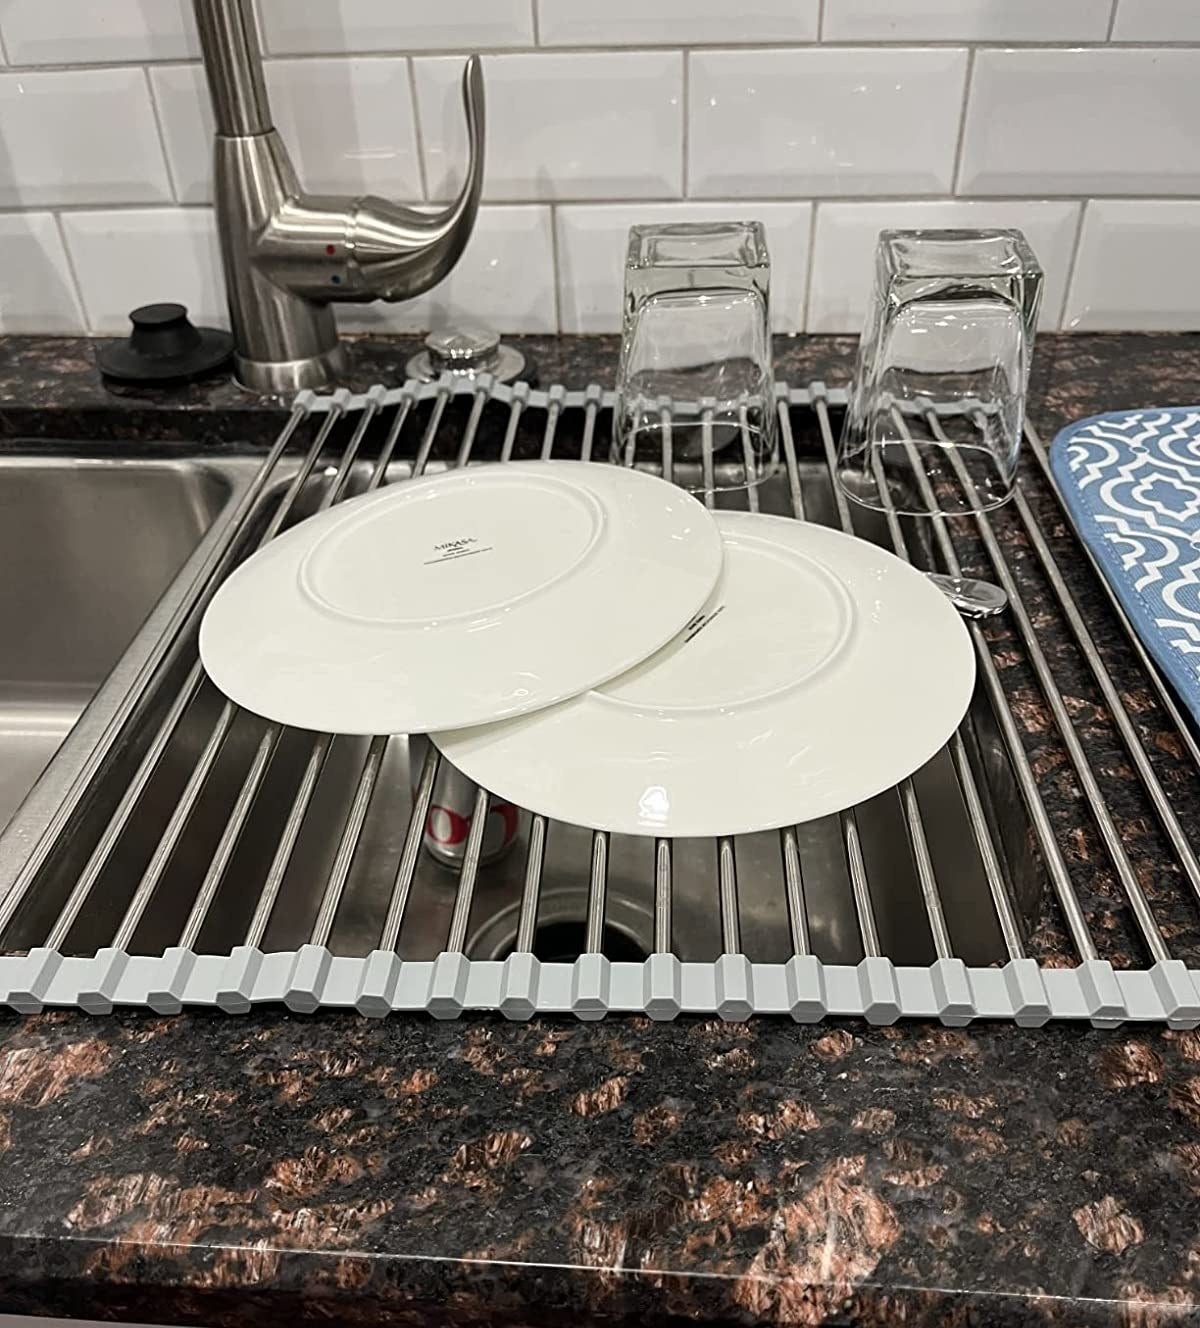 Reviewer image of plates on drying rack